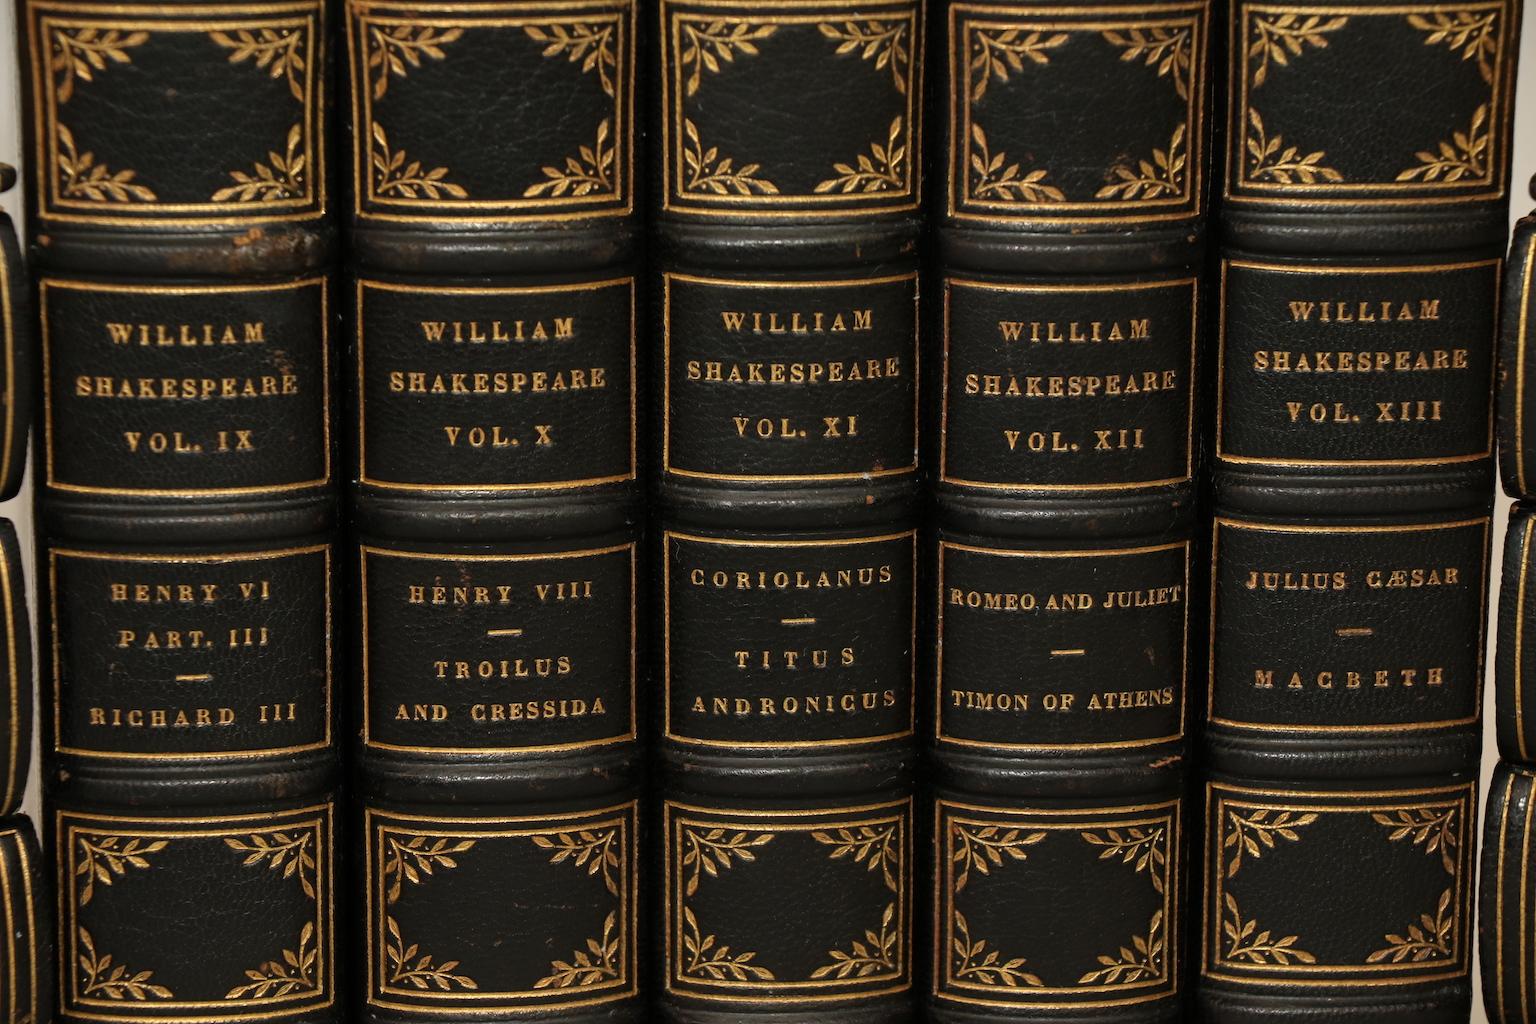 American Craftsman The Comedies, Histories, Tragedies, and Poems of William Shakespeare